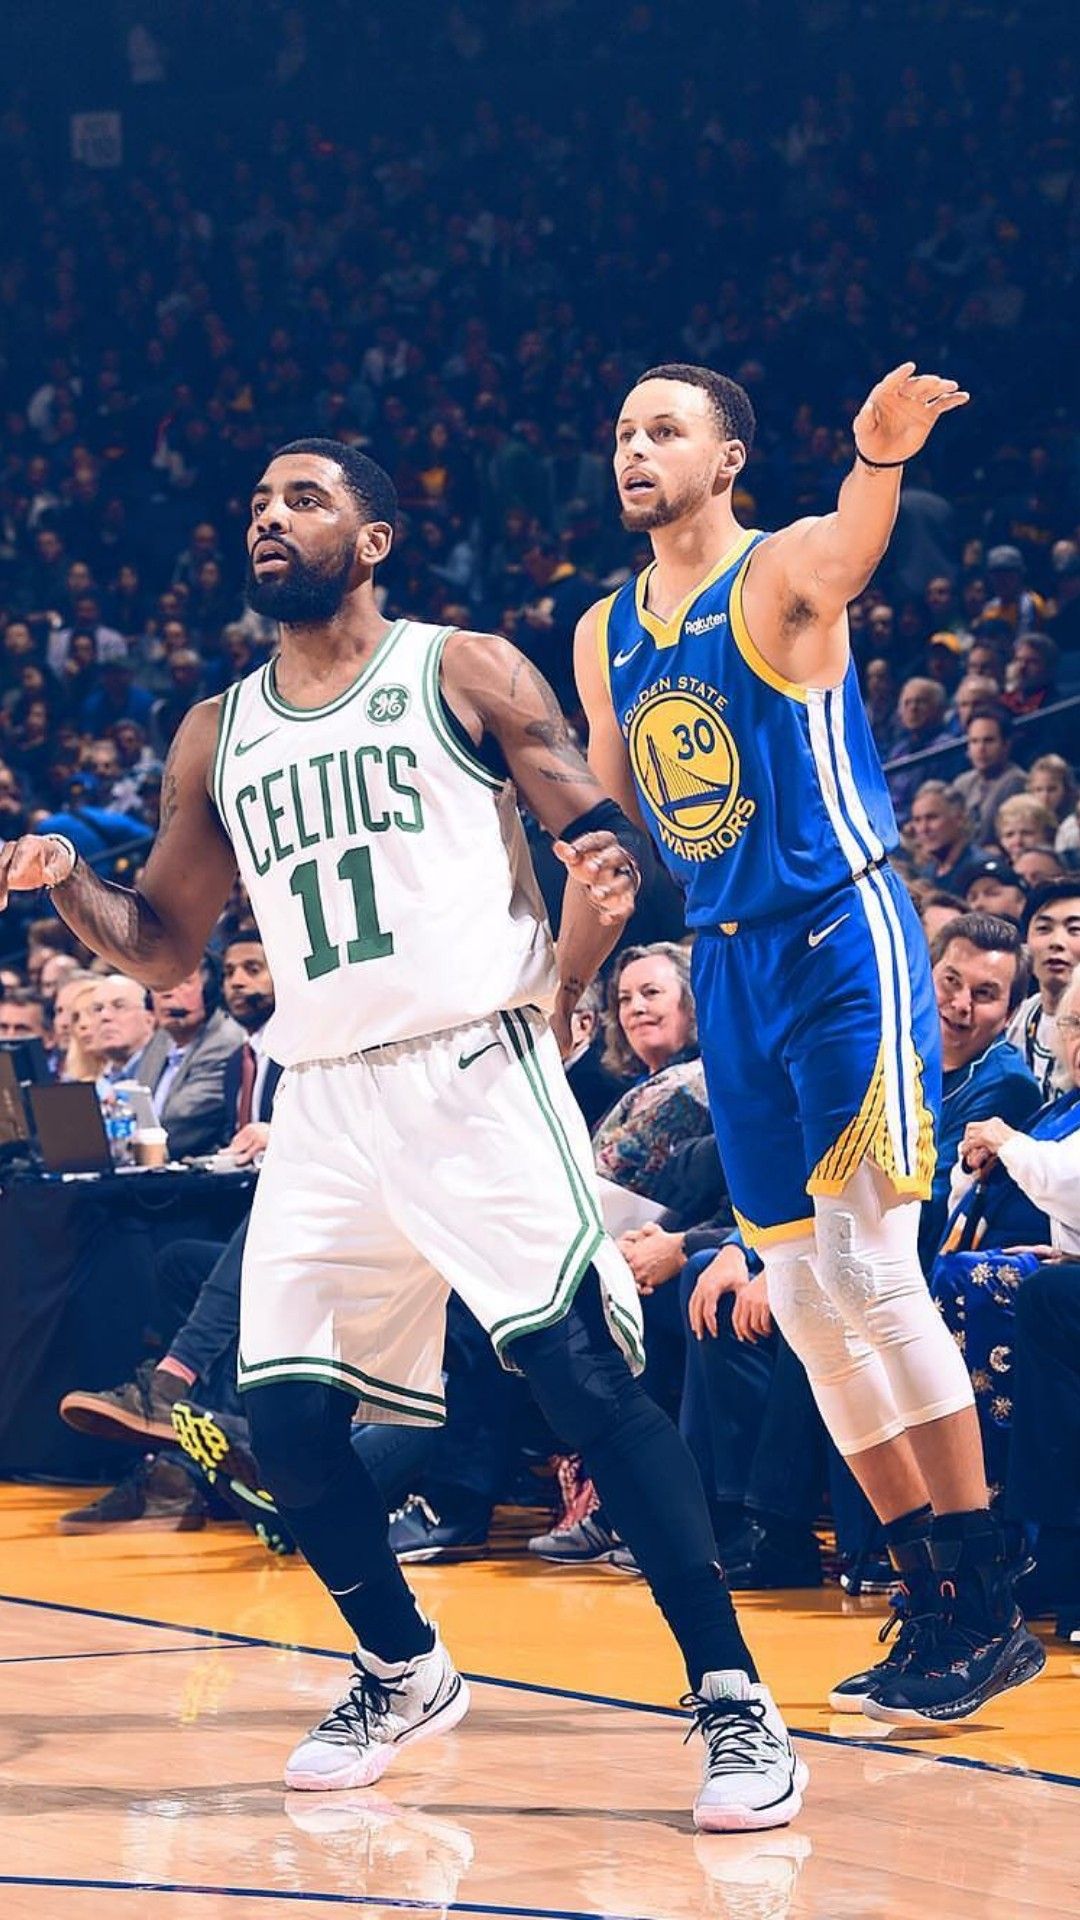 Curry and Kyrie wallpaper. Stephen curry basketball, Basketball players nba, Curry basketball